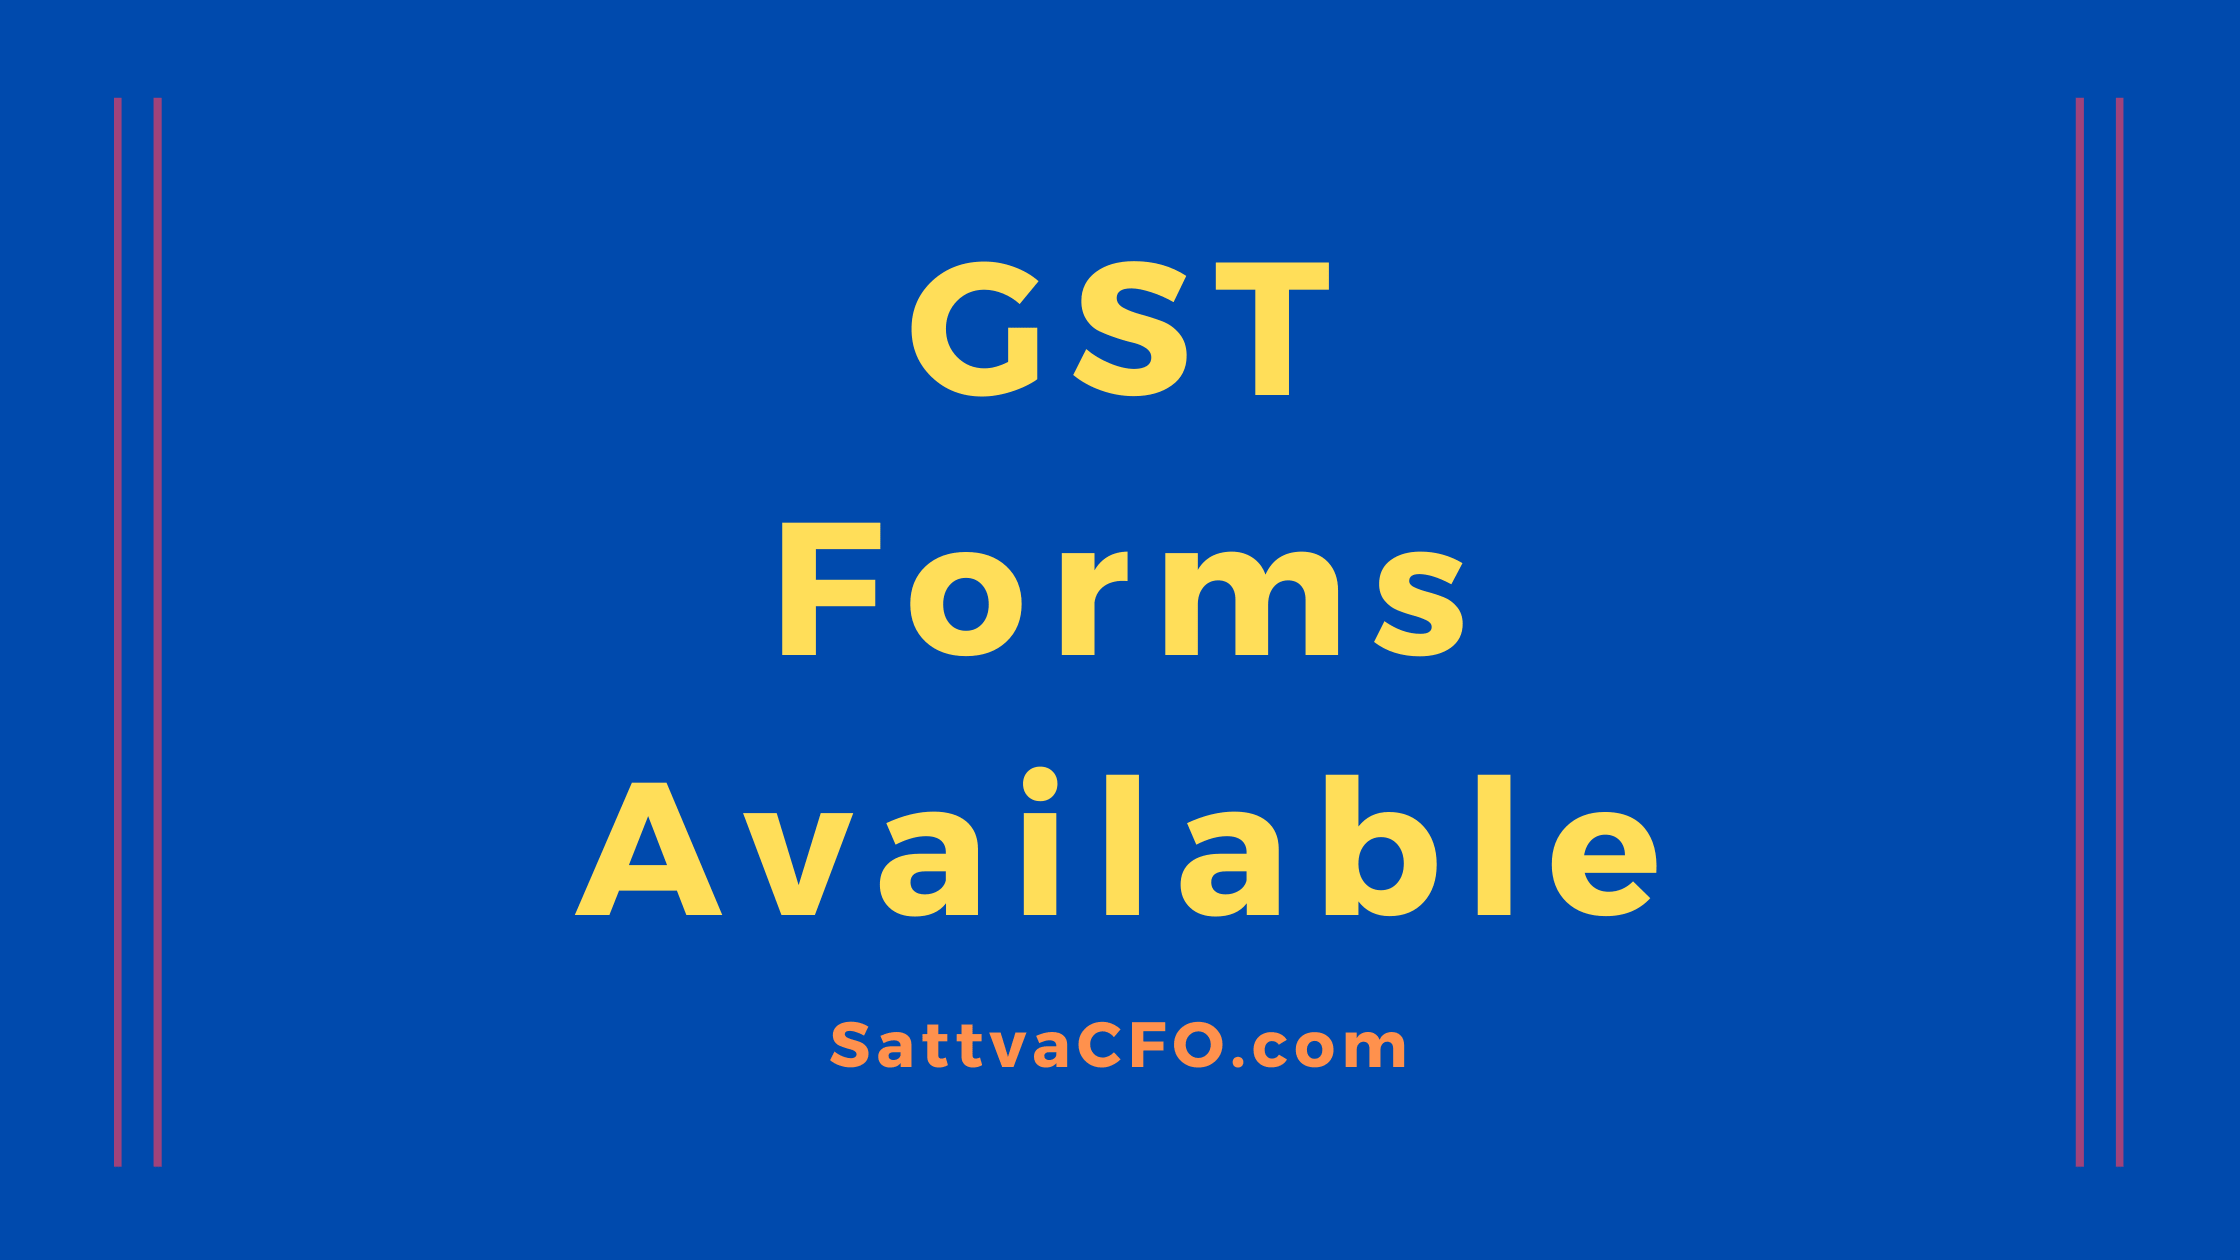 GST Forms available | SattvaCFO